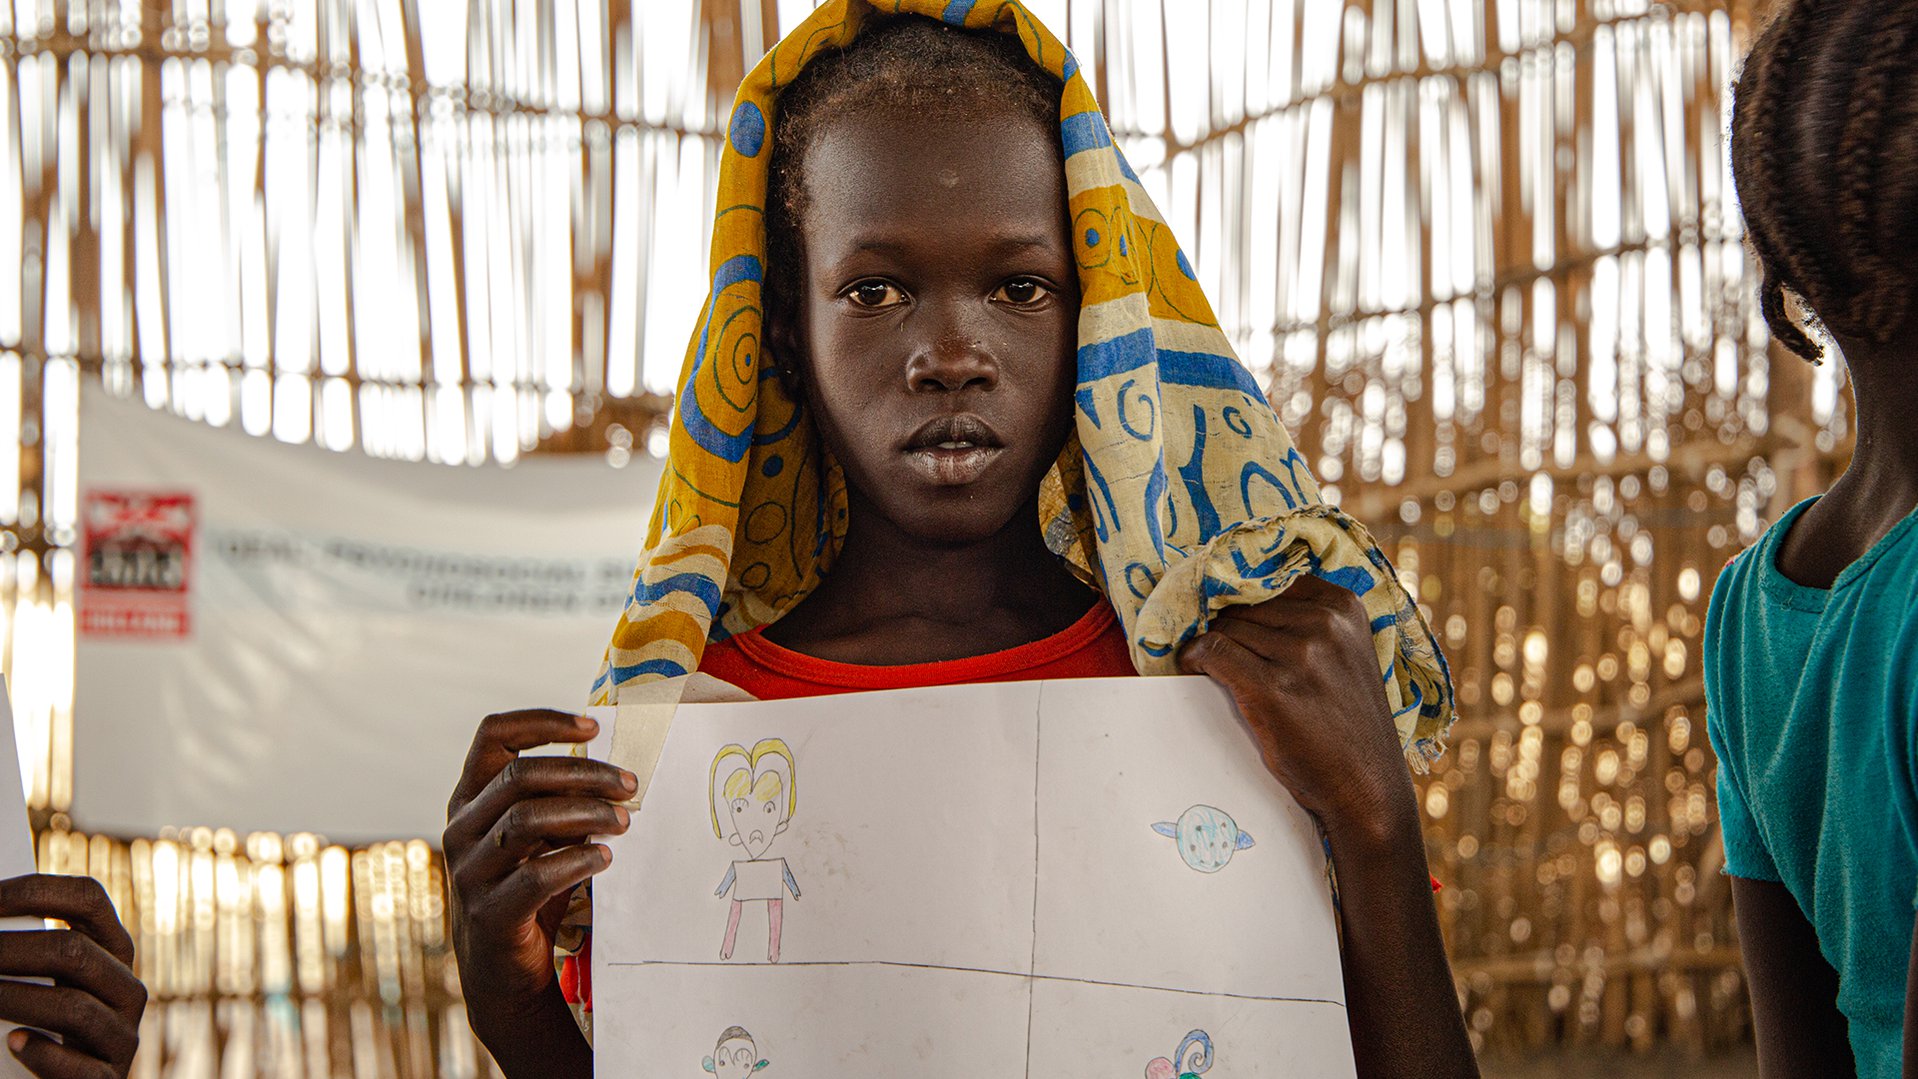 War Child Holland in South Sudan - girl with drawing